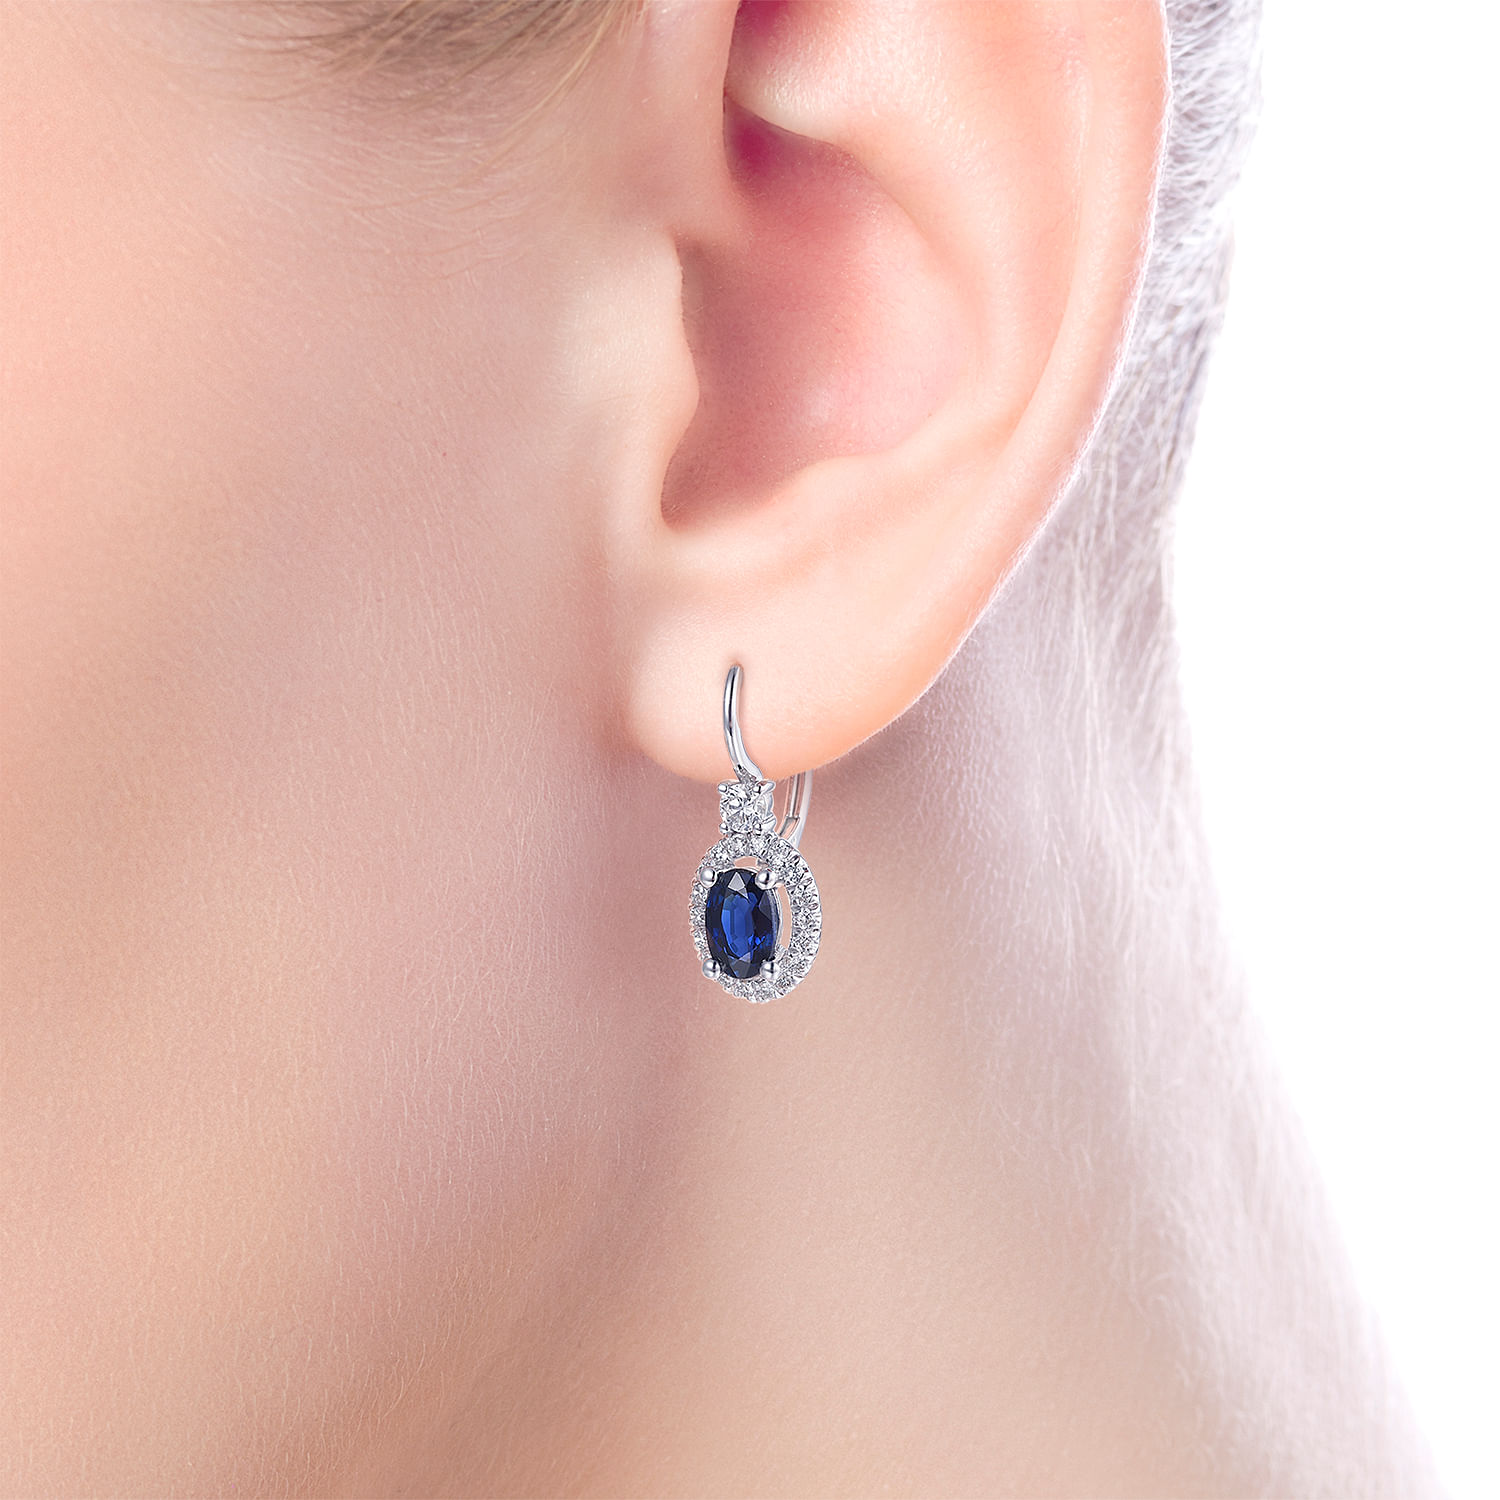 14K White Gold Sapphire Oval and Diamond Halo Leverback Earrings